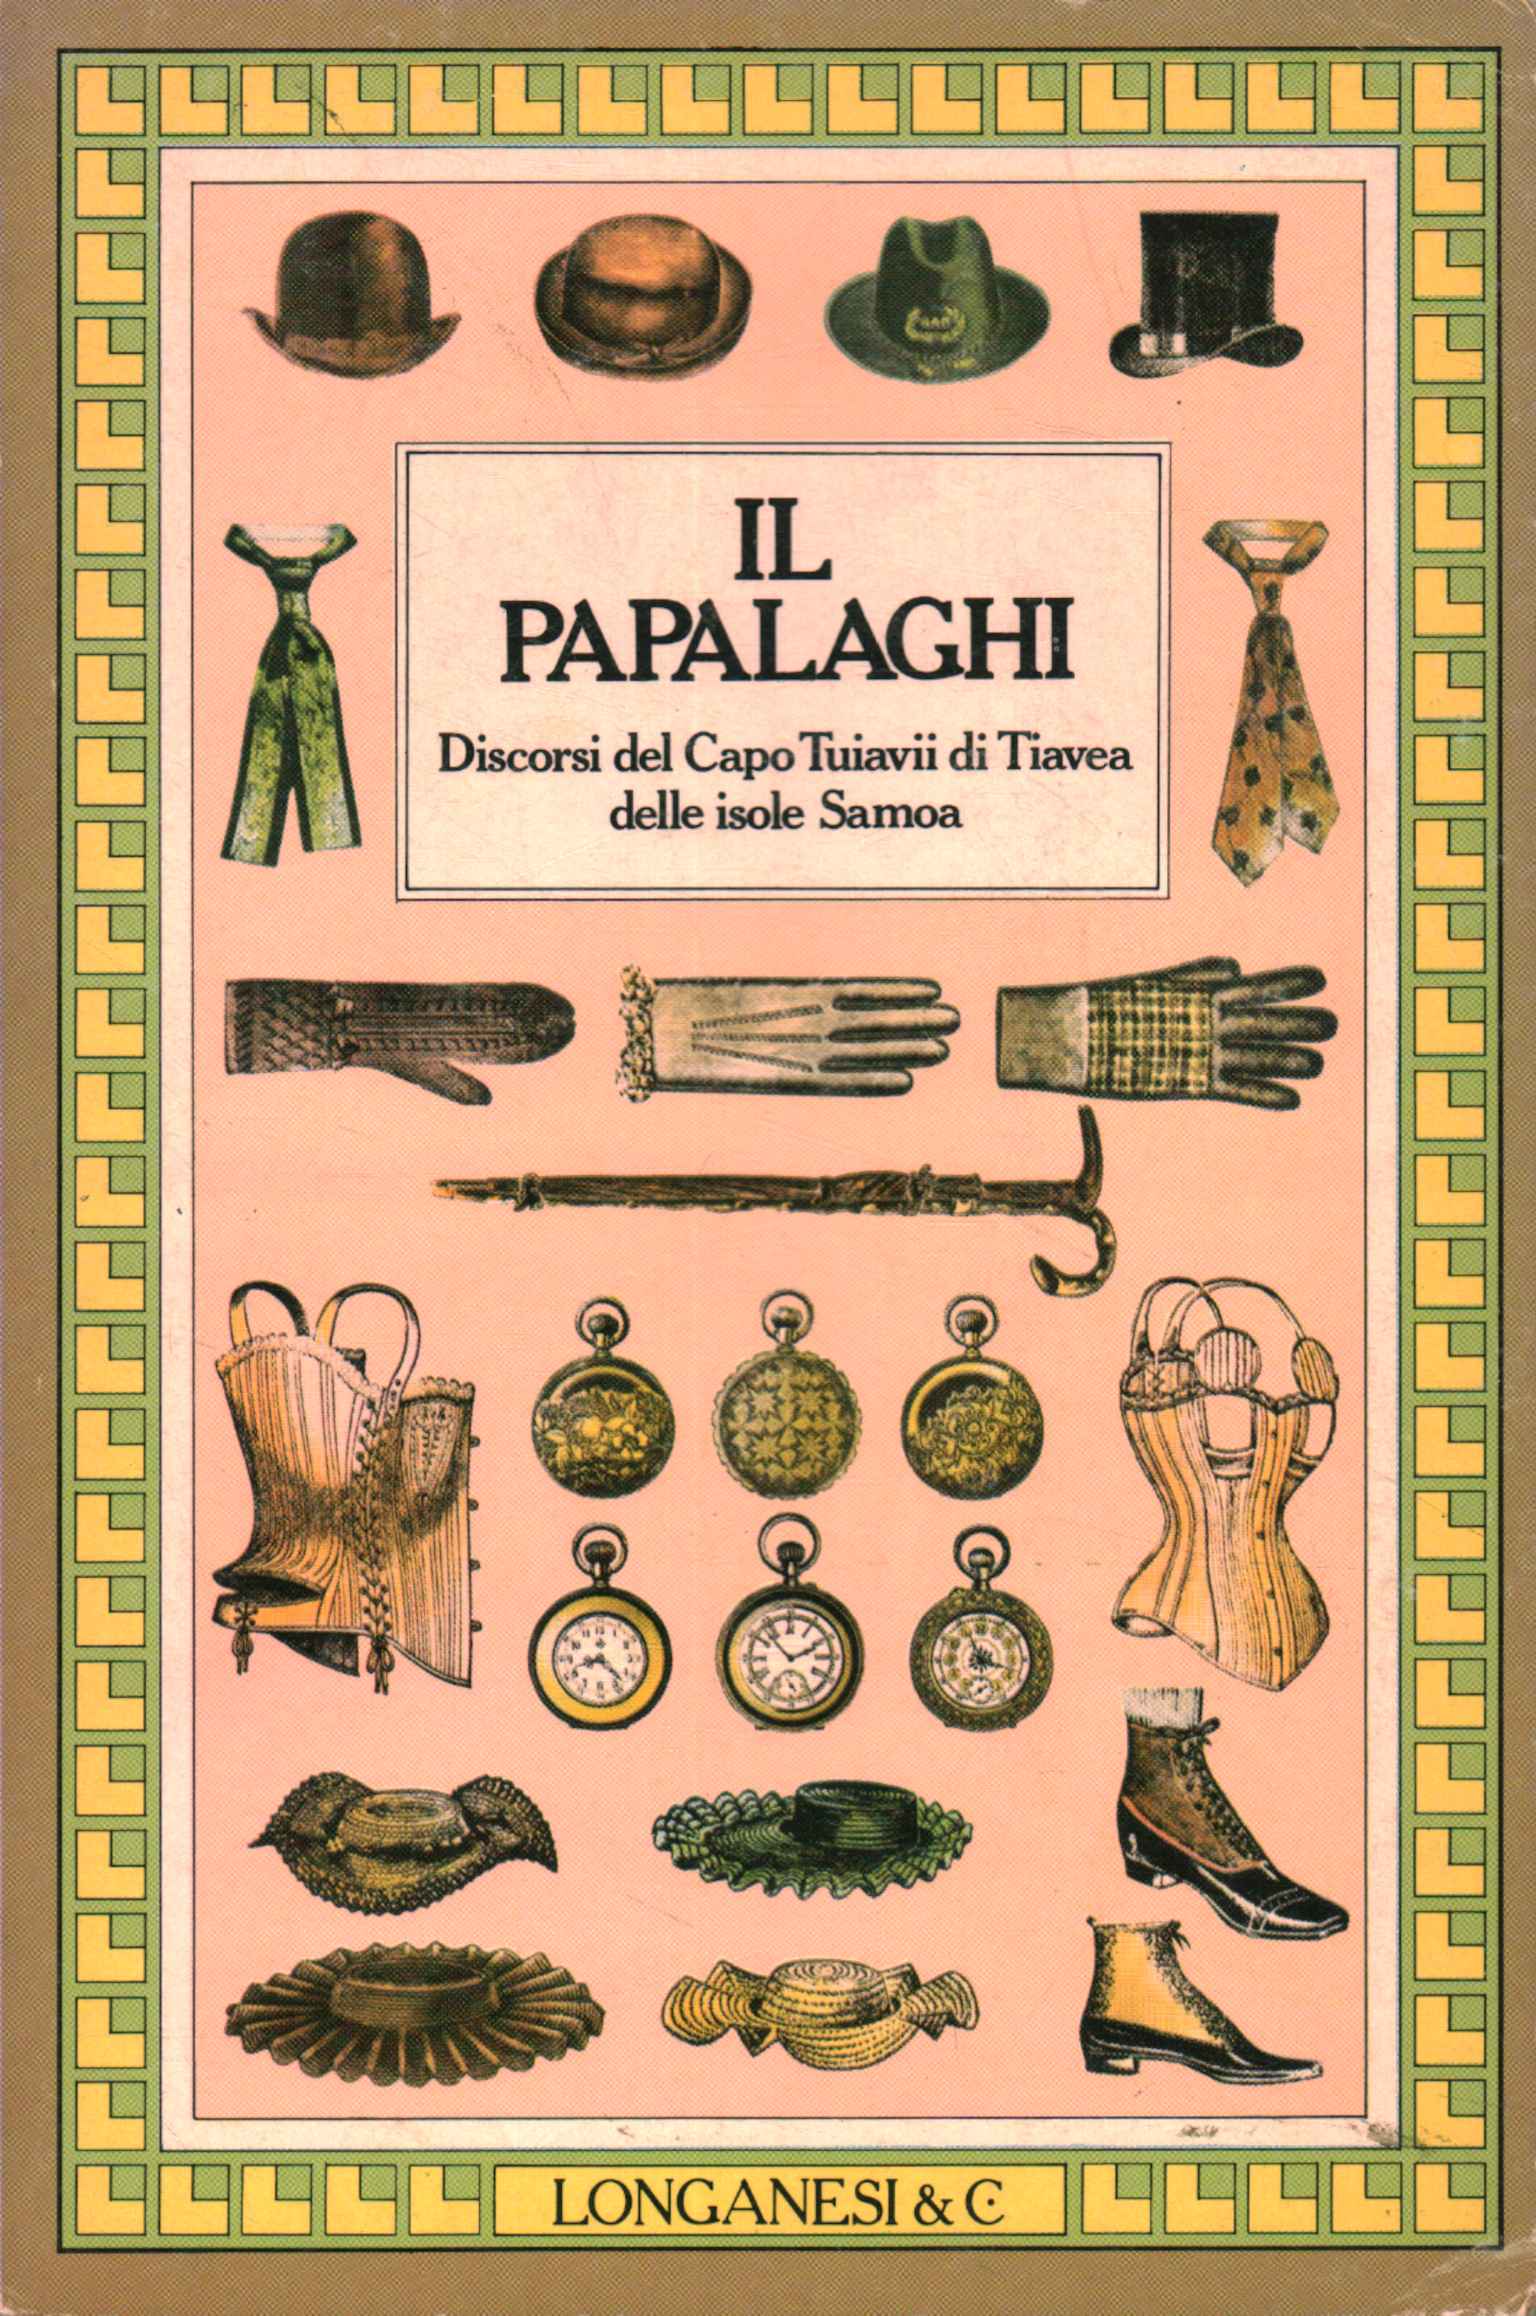 The papalaghi